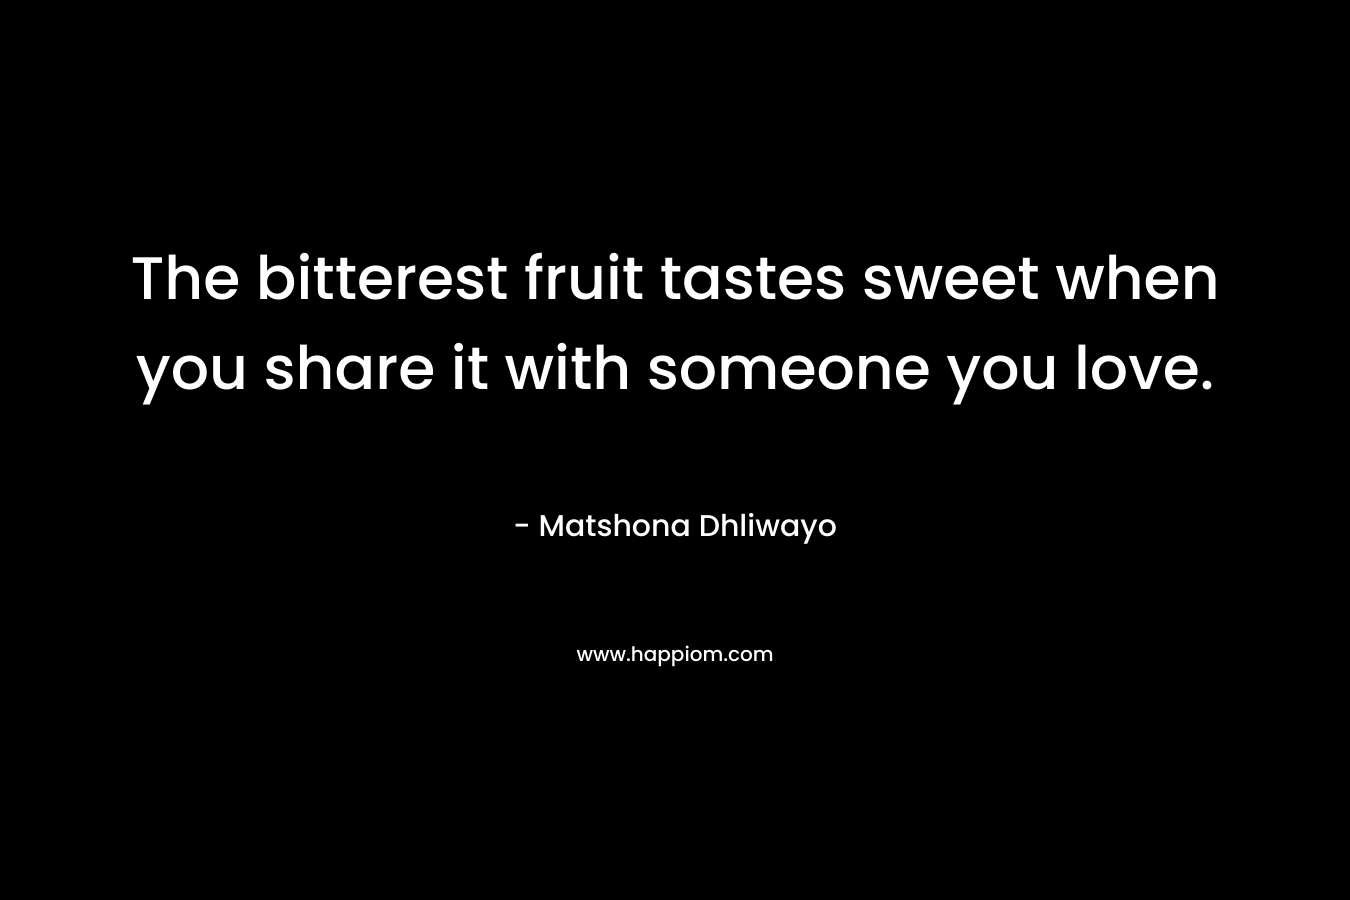 The bitterest fruit tastes sweet when you share it with someone you love. – Matshona Dhliwayo